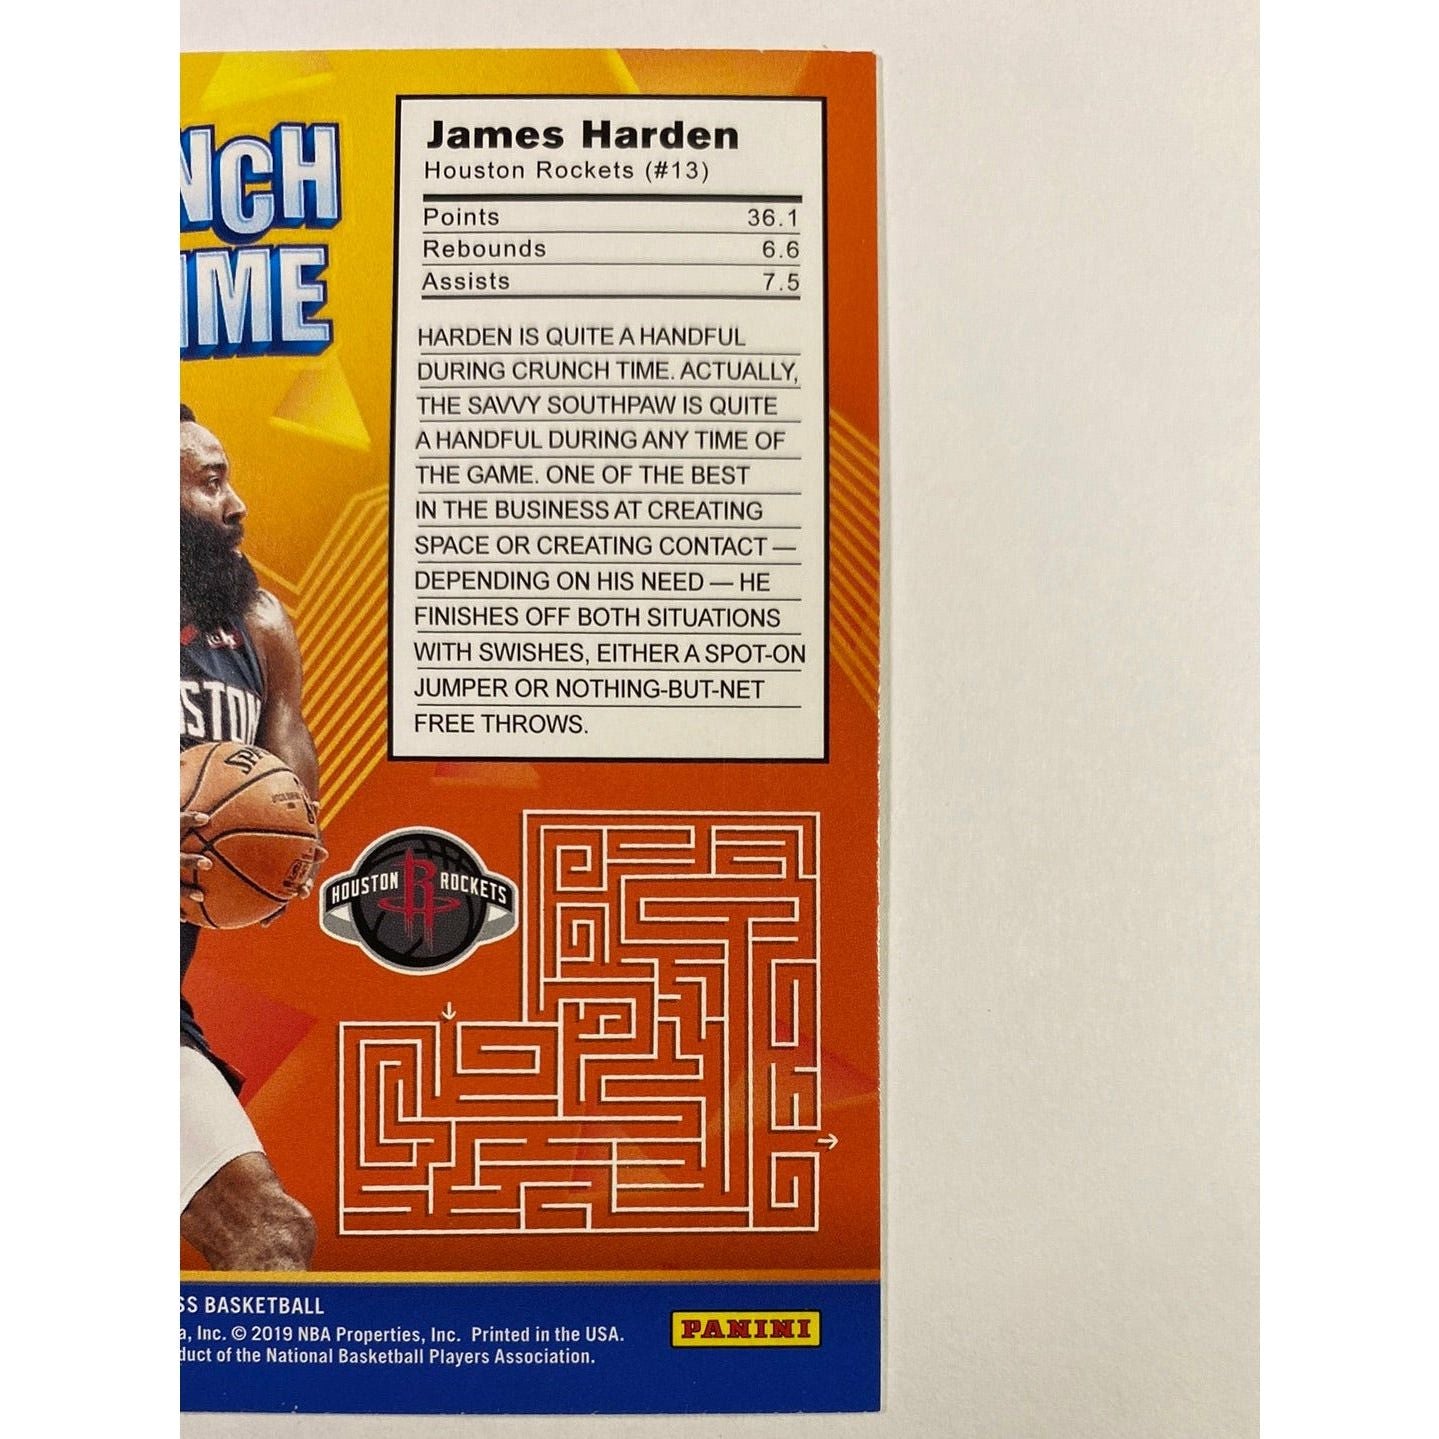  2019-20 Donruss James Harden Crunch Time  Local Legends Cards & Collectibles